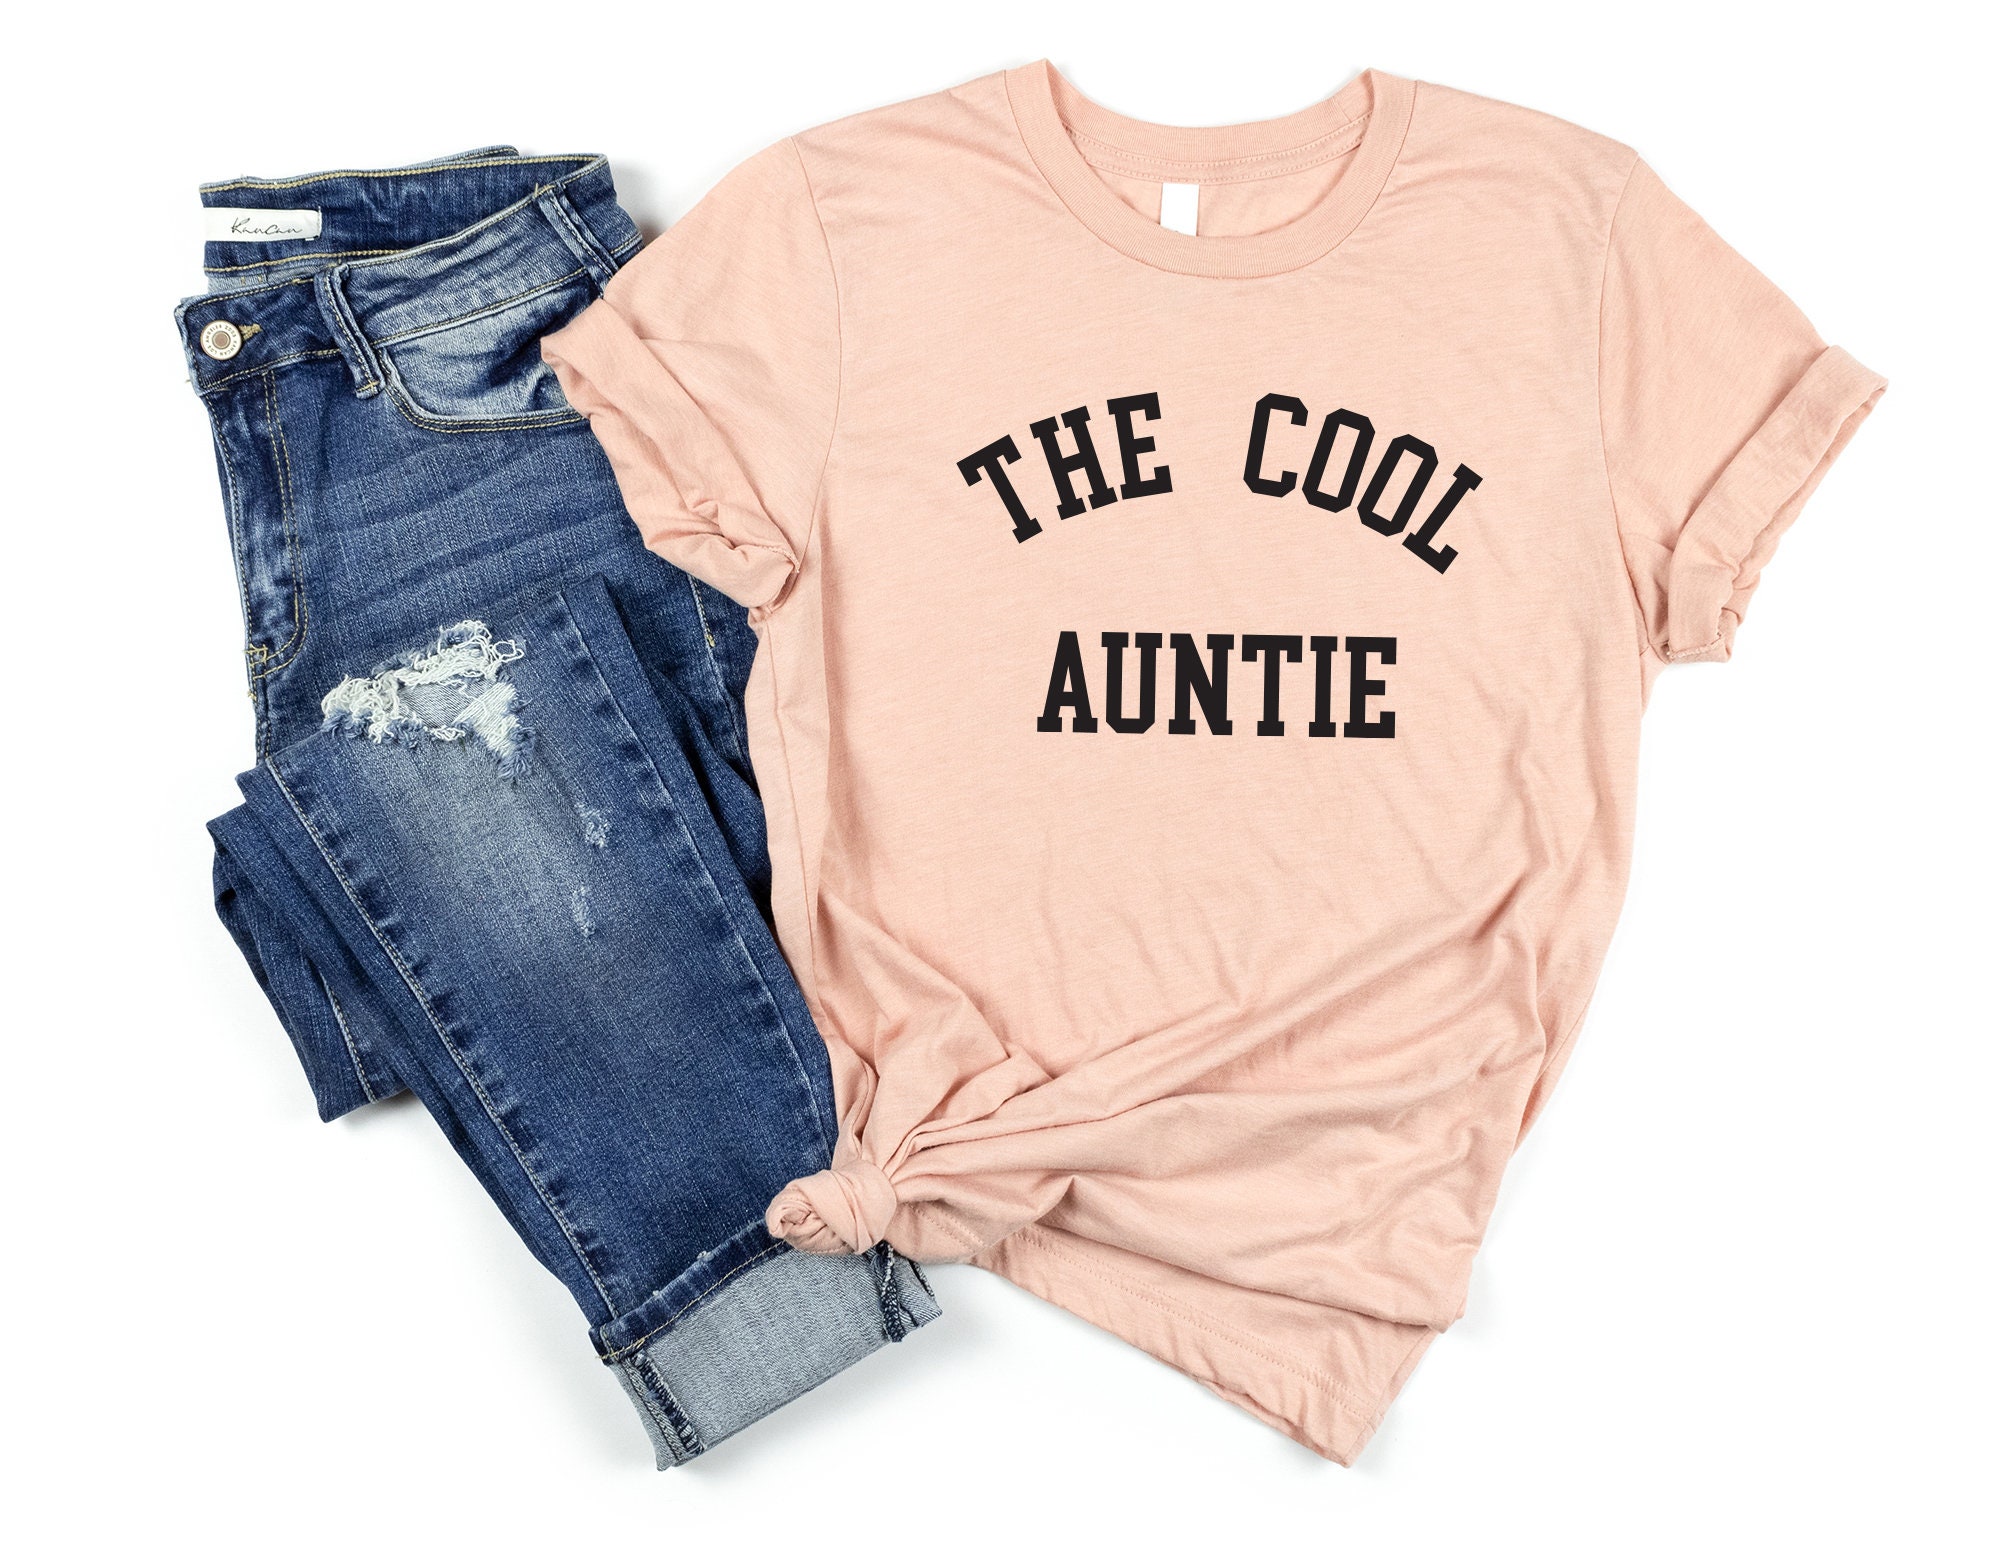 Aunt Life T Shirt Auntie Shirts Women Cute Heart Aunt Vibes Shirt Casual Short Sleeve Aunt Gift Shirts Tops 